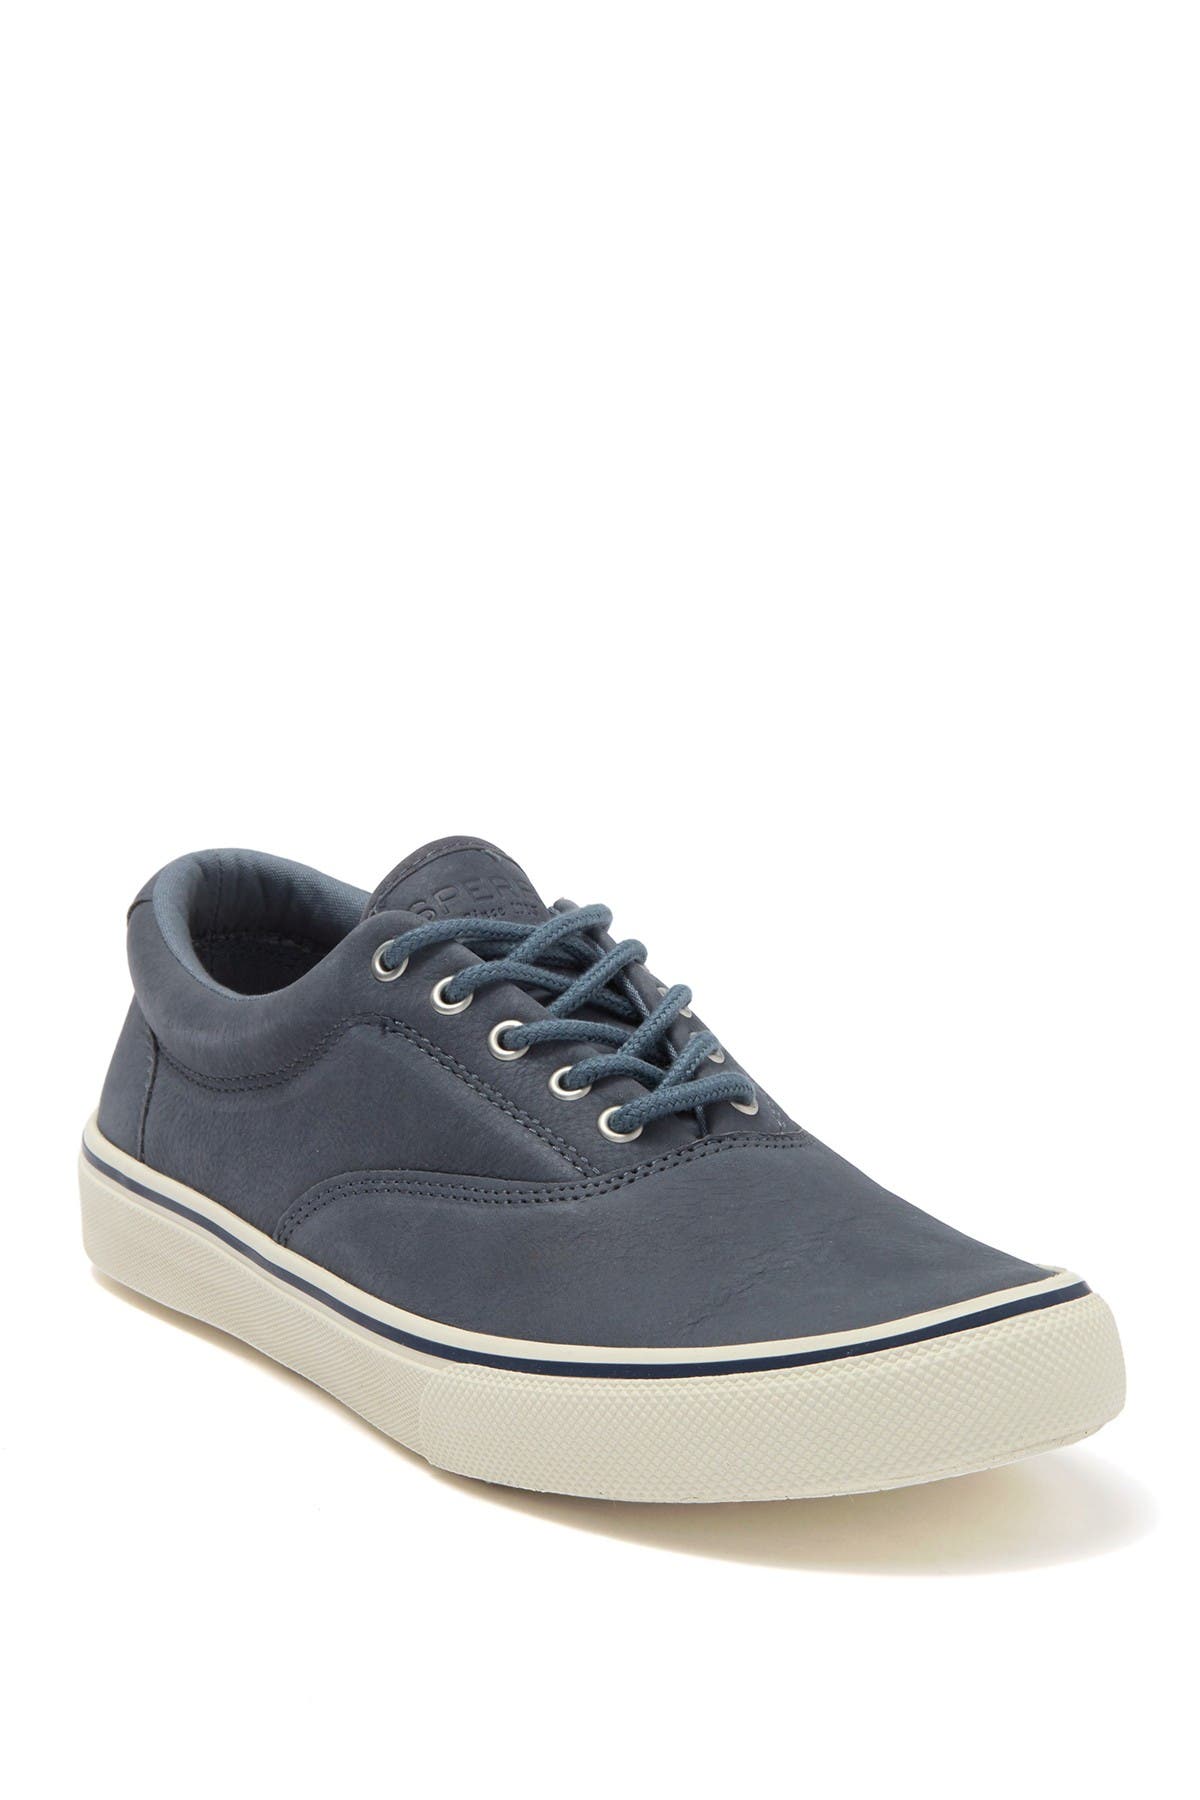 sperry washable leather sneakers